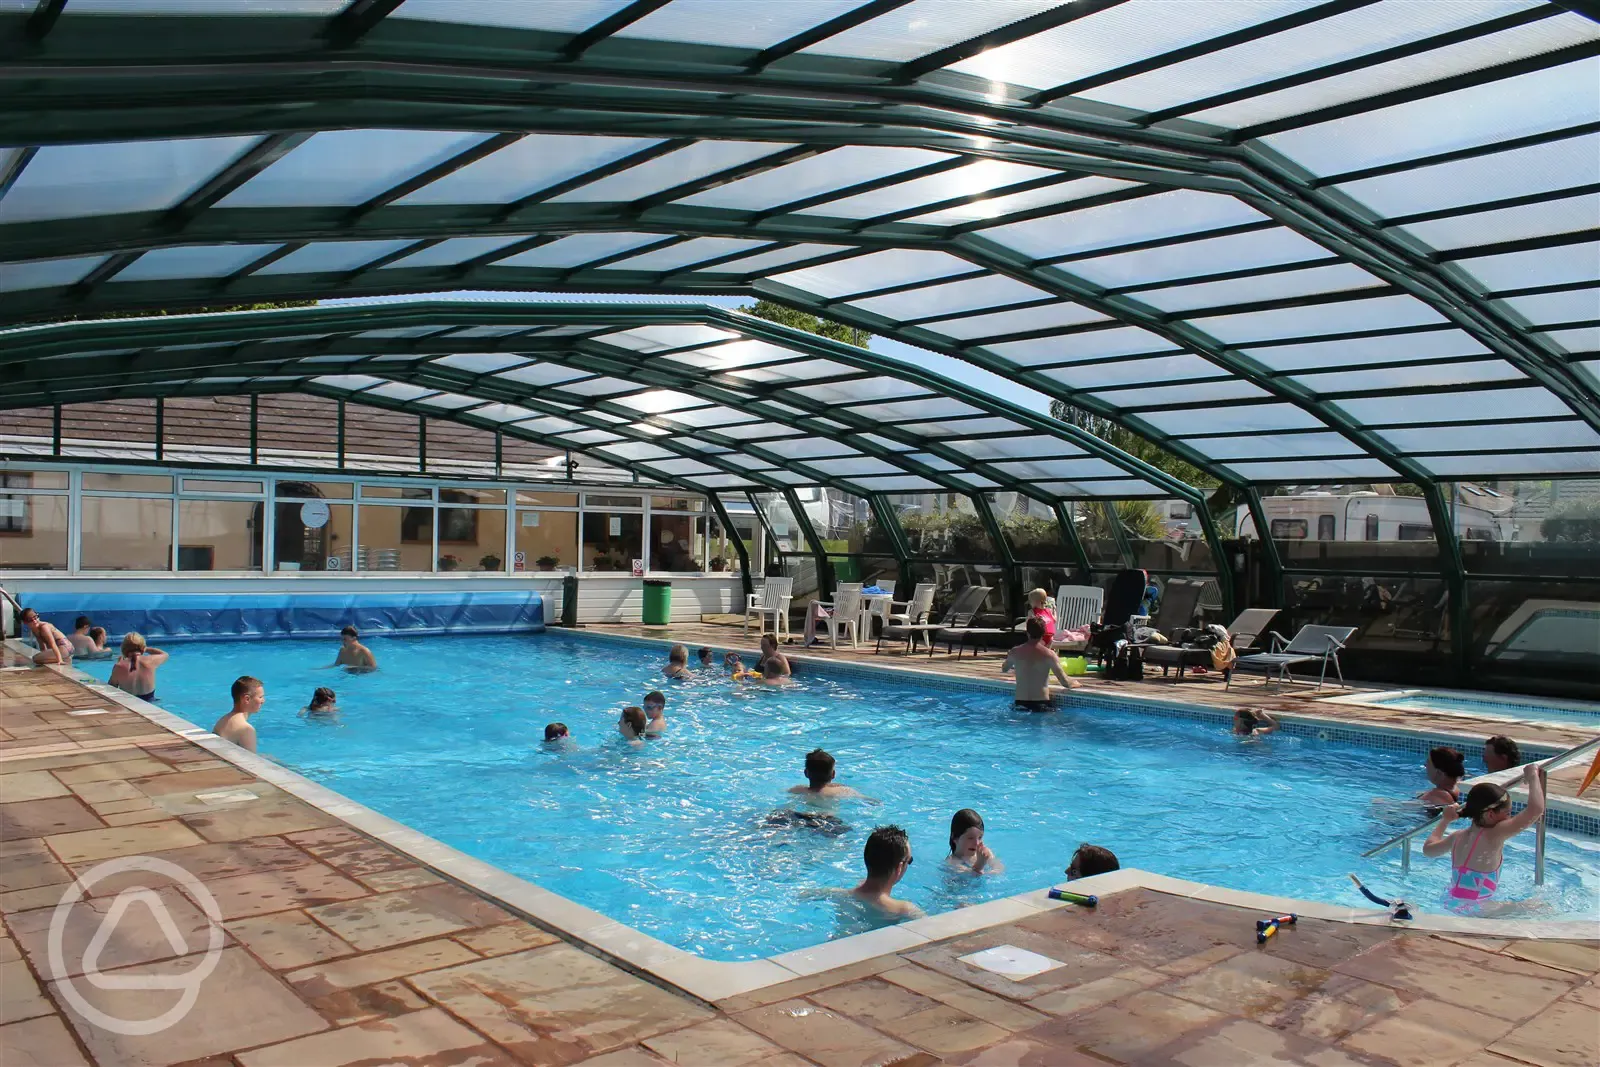 Heating covered swimming pool